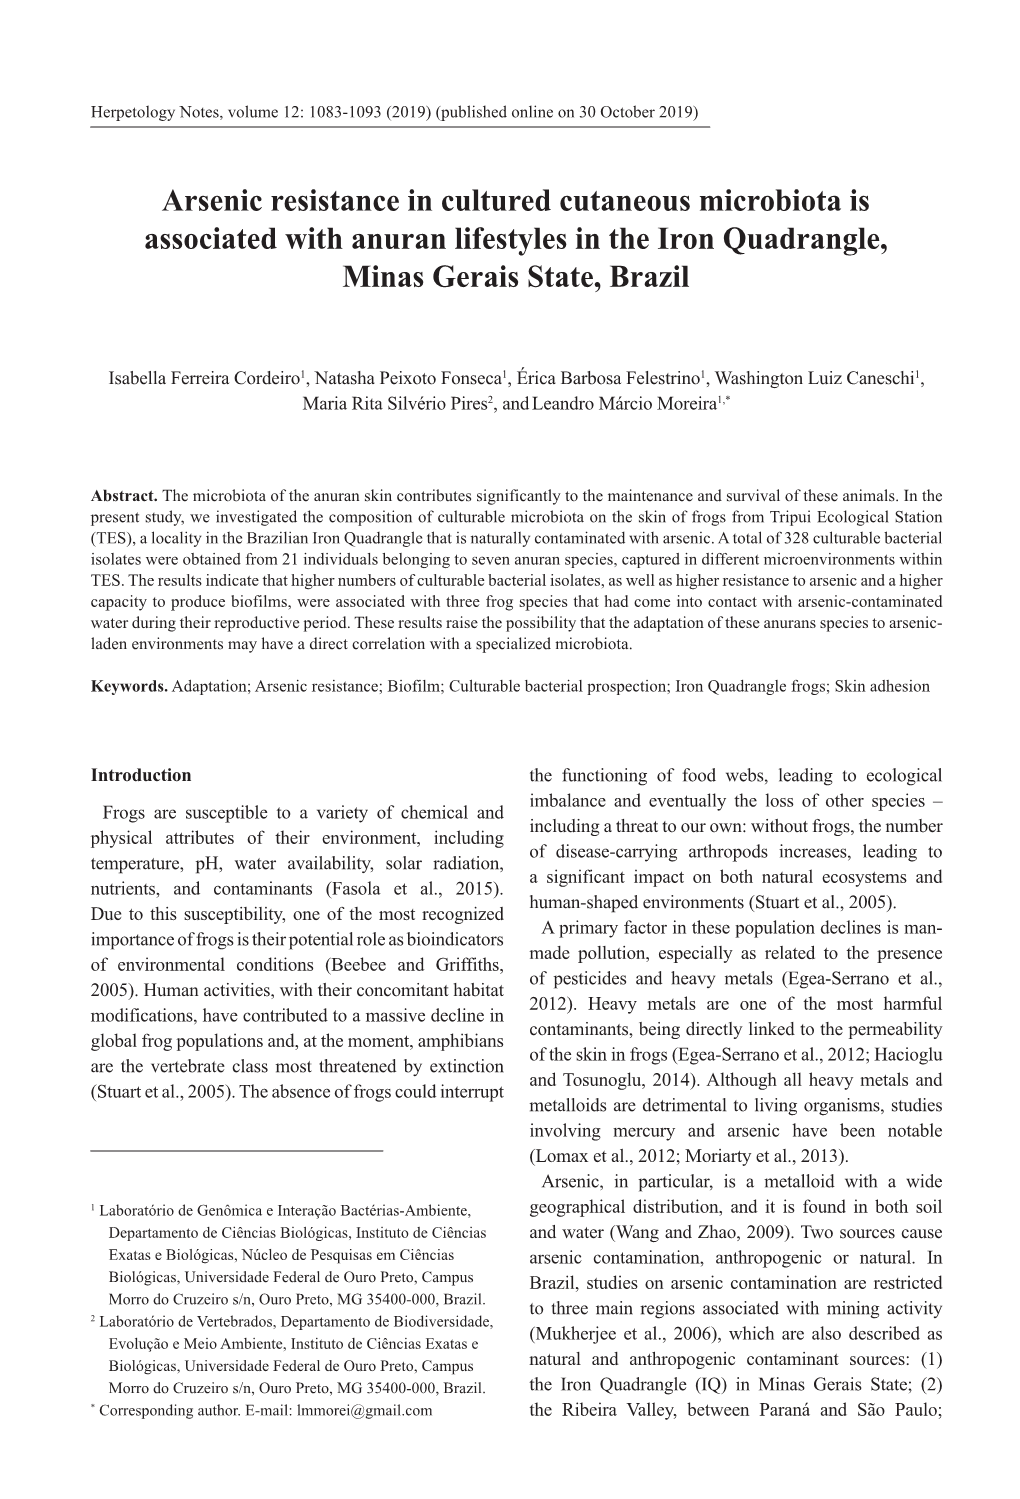 Arsenic Resistance in Cultured Cutaneous Microbiota Is Associated with Anuran Lifestyles in the Iron Quadrangle, Minas Gerais State, Brazil